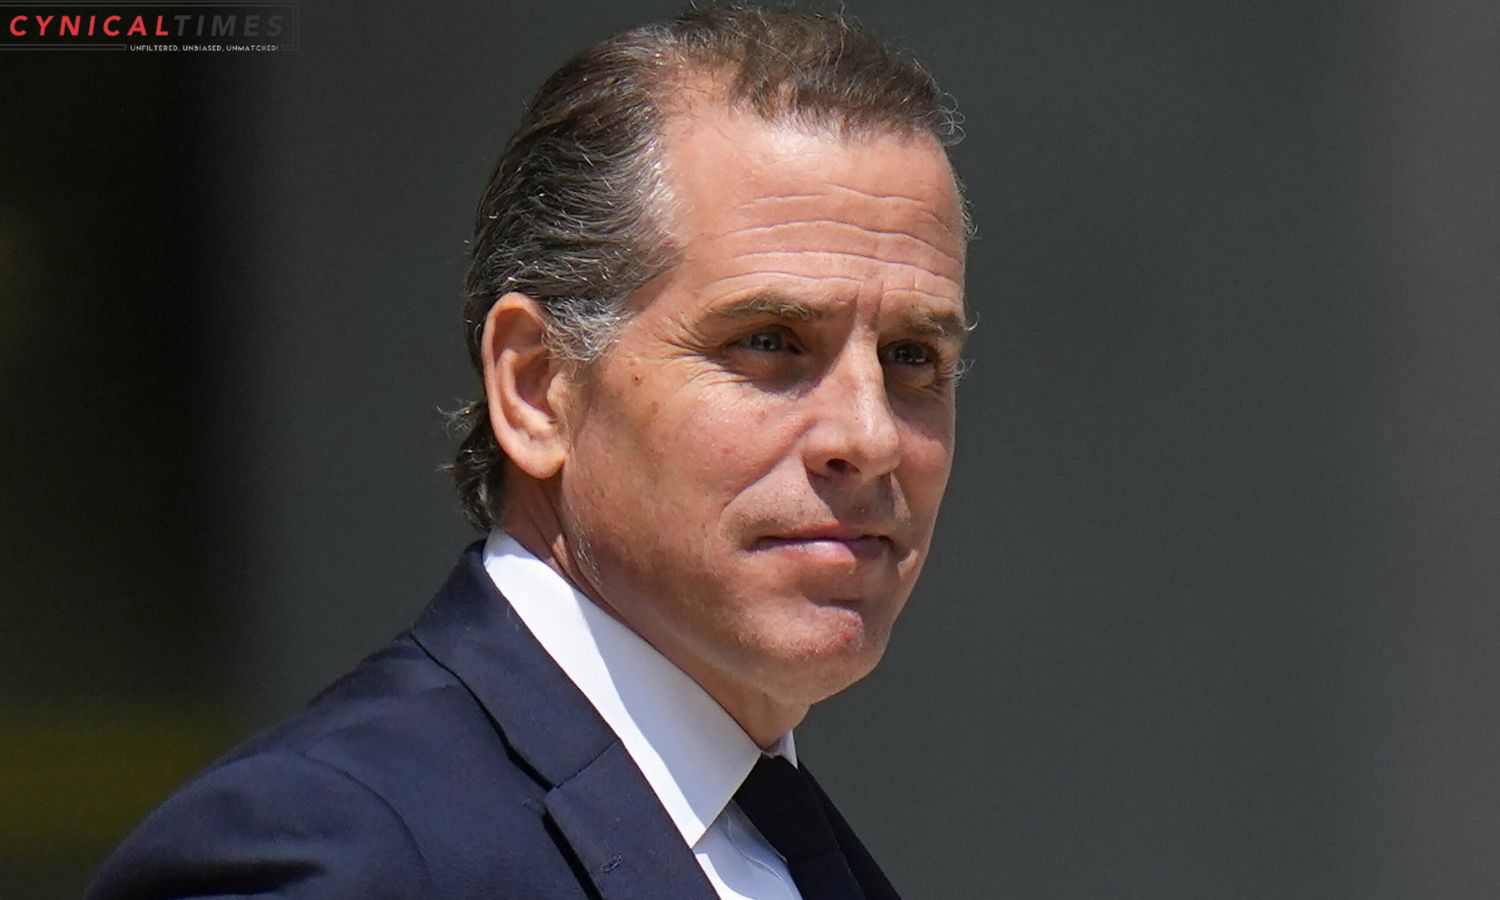 Hunter Biden Faces Tax Charges